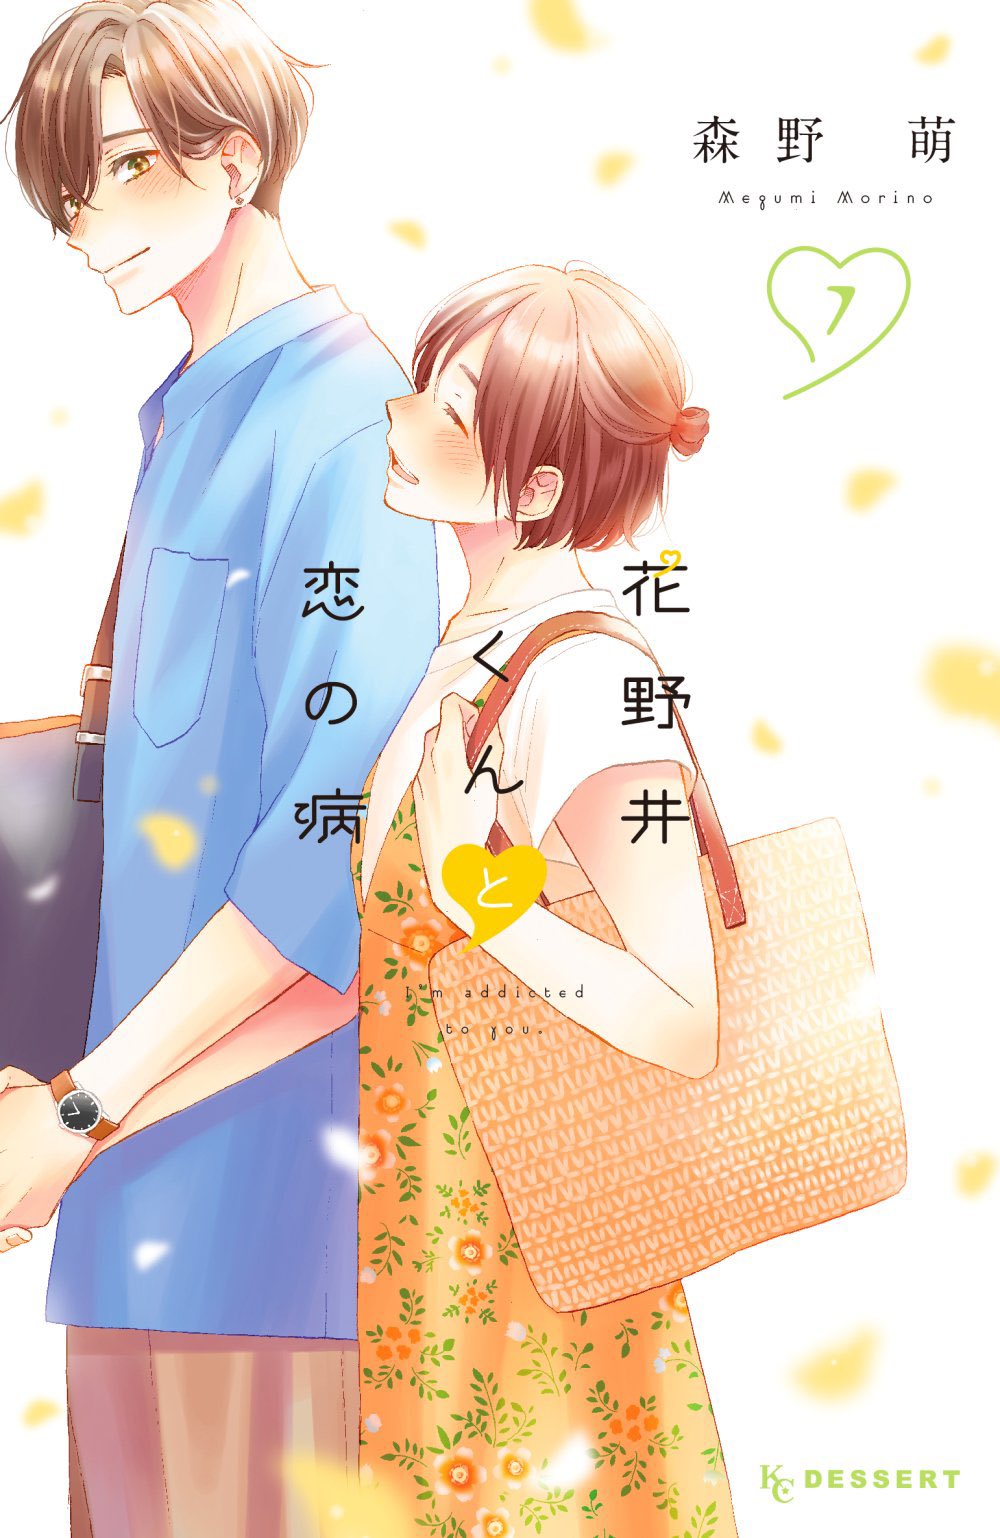 Kushikime Twitterissa A Condition Called Love Volume 7 Cover Because He Was Given An Umbrella During A Snowy Day Hananoi Kun Confess His Love To Her Where Does That Love Go This Is